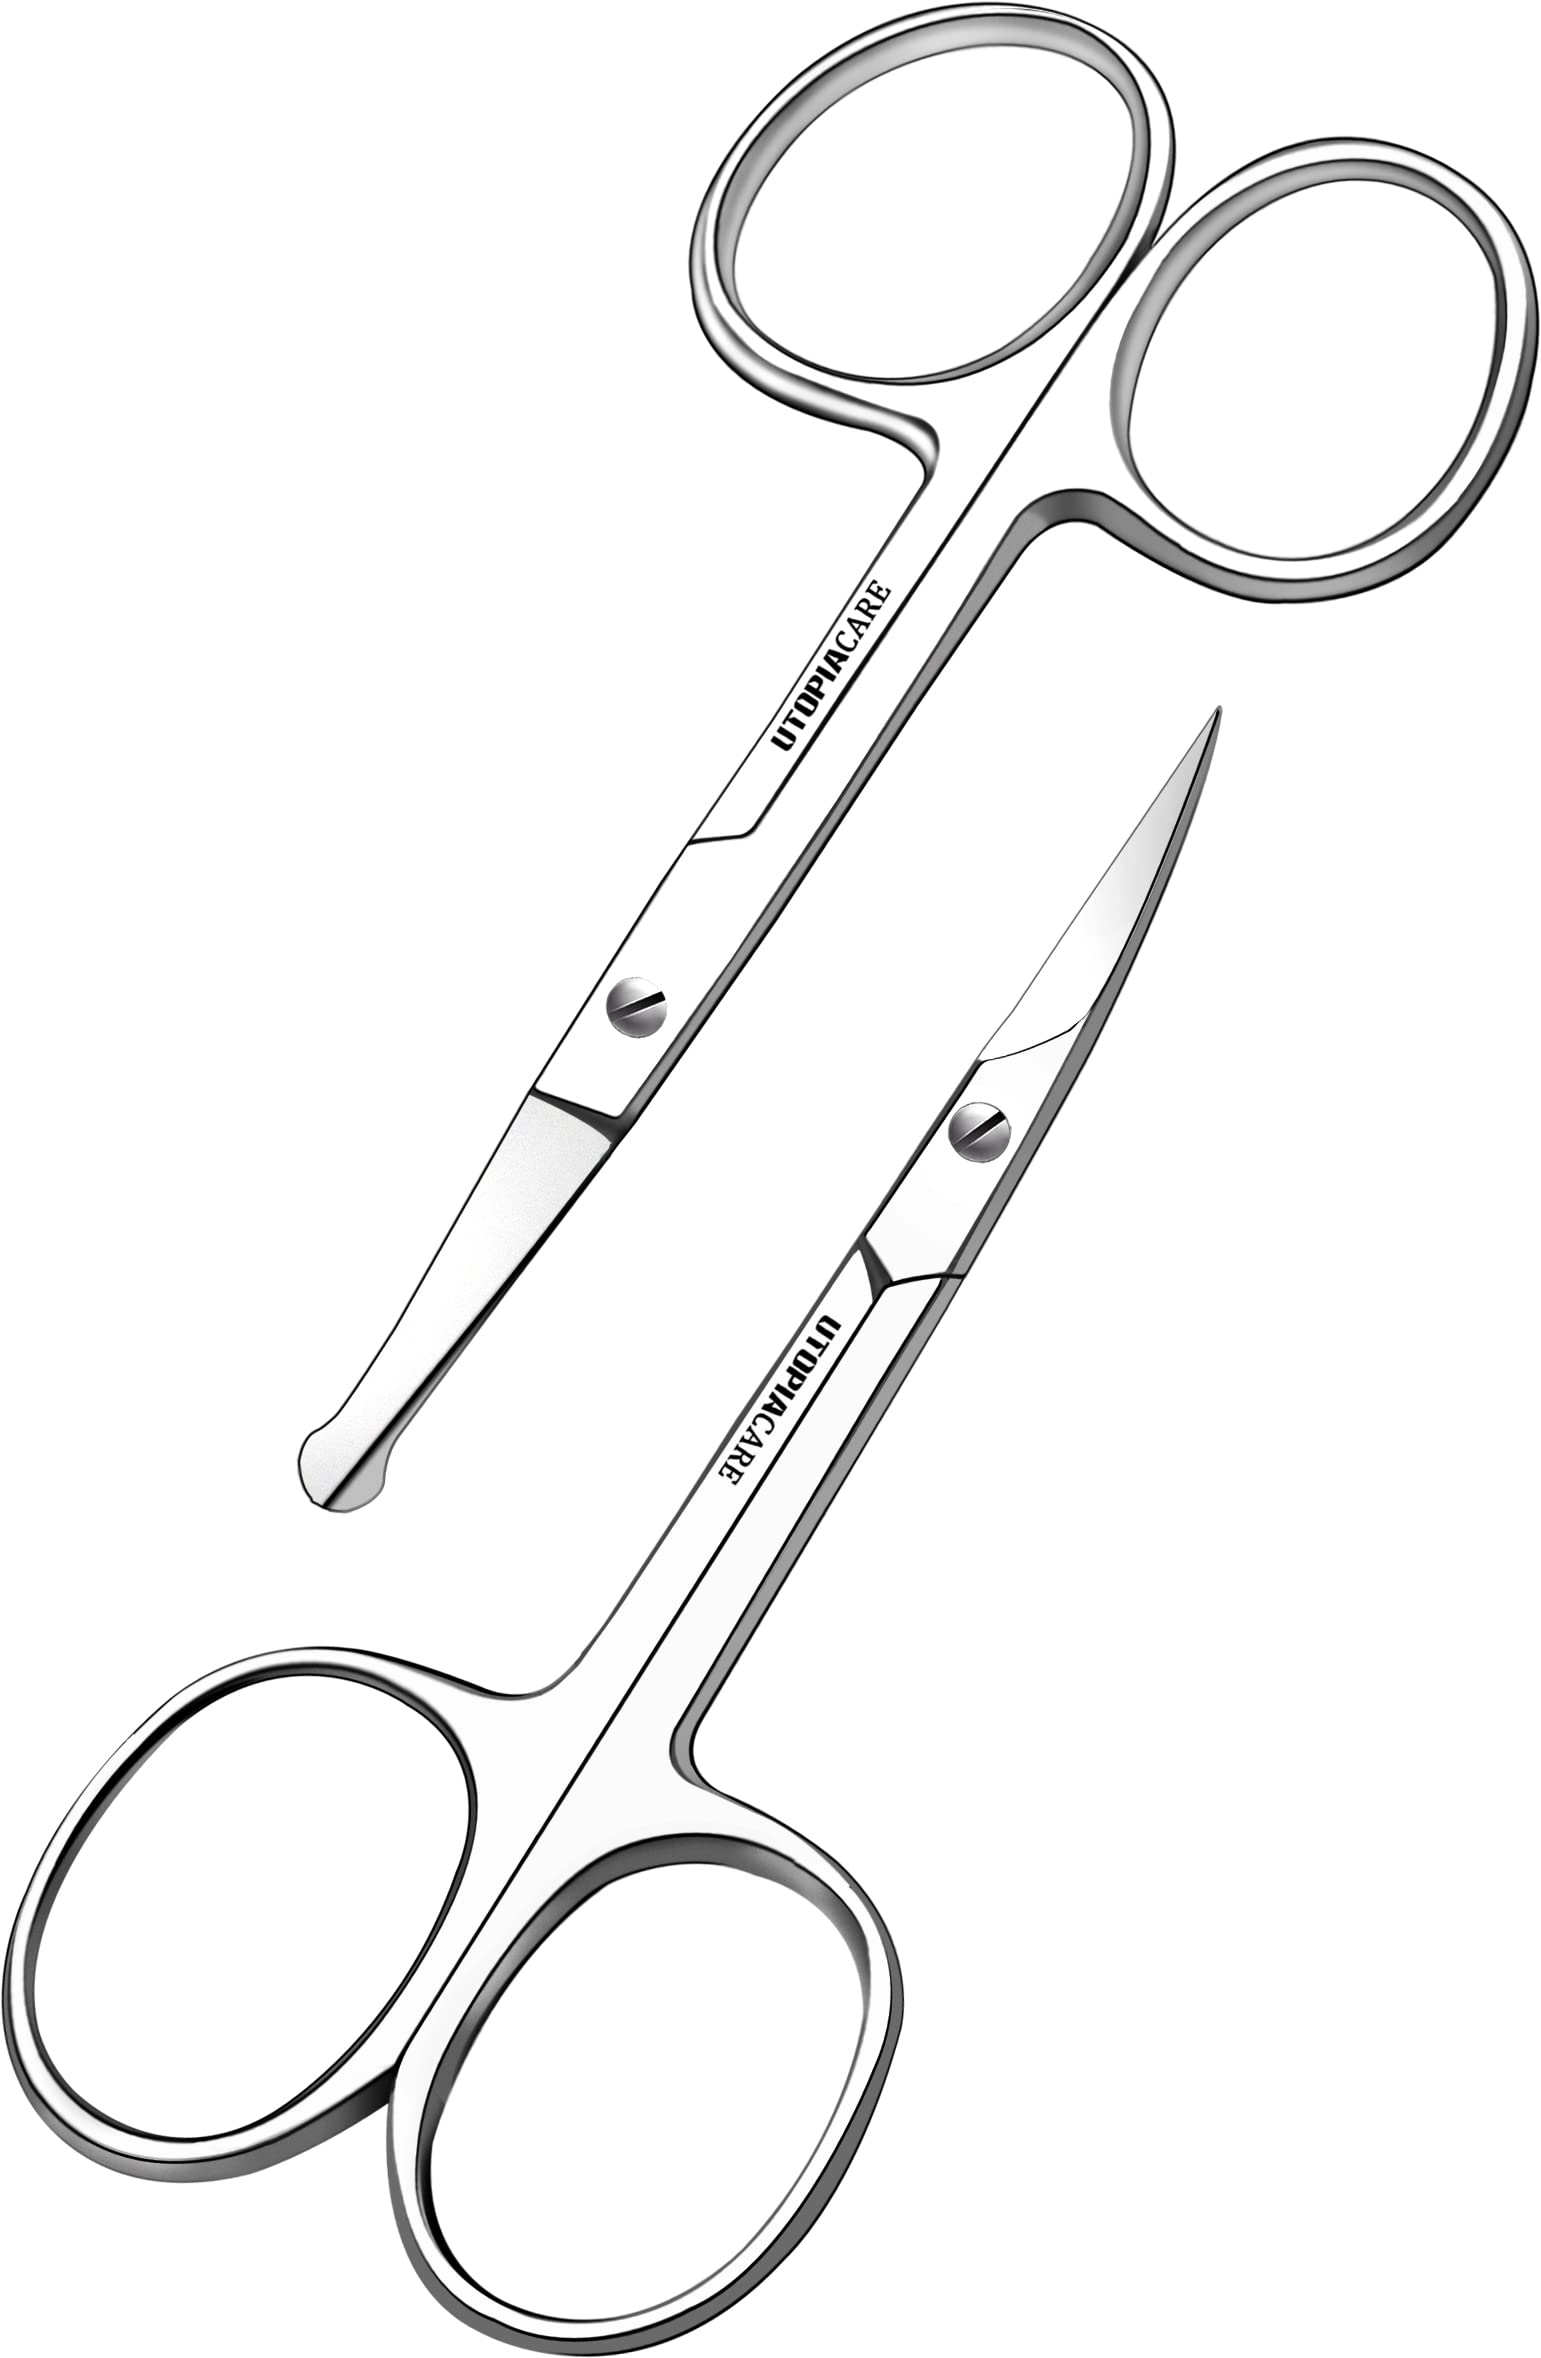 Curved and Rounded Facial Hair Scissors for Men - Mustache, Nose Hair &  Beard Trimming Scissors, Safety Use for Eyebrows, Eyelashes, and Ear Hair -  China Scissors, Curved and Rounded Scissors